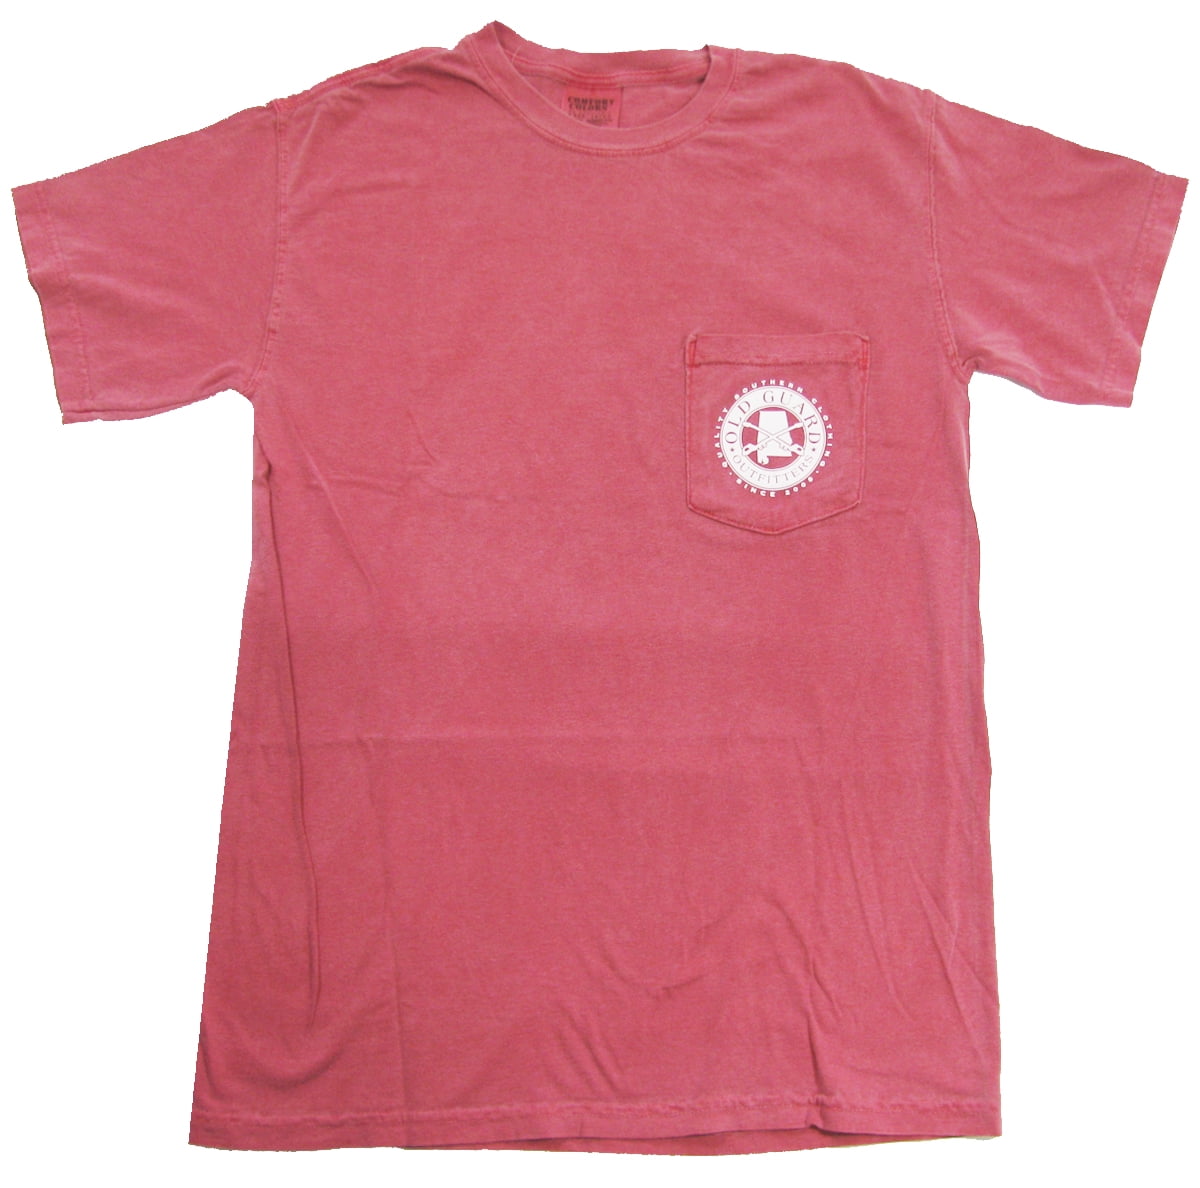 Louisiana Letterpress Graphic Tee by Old Guard Outfitters